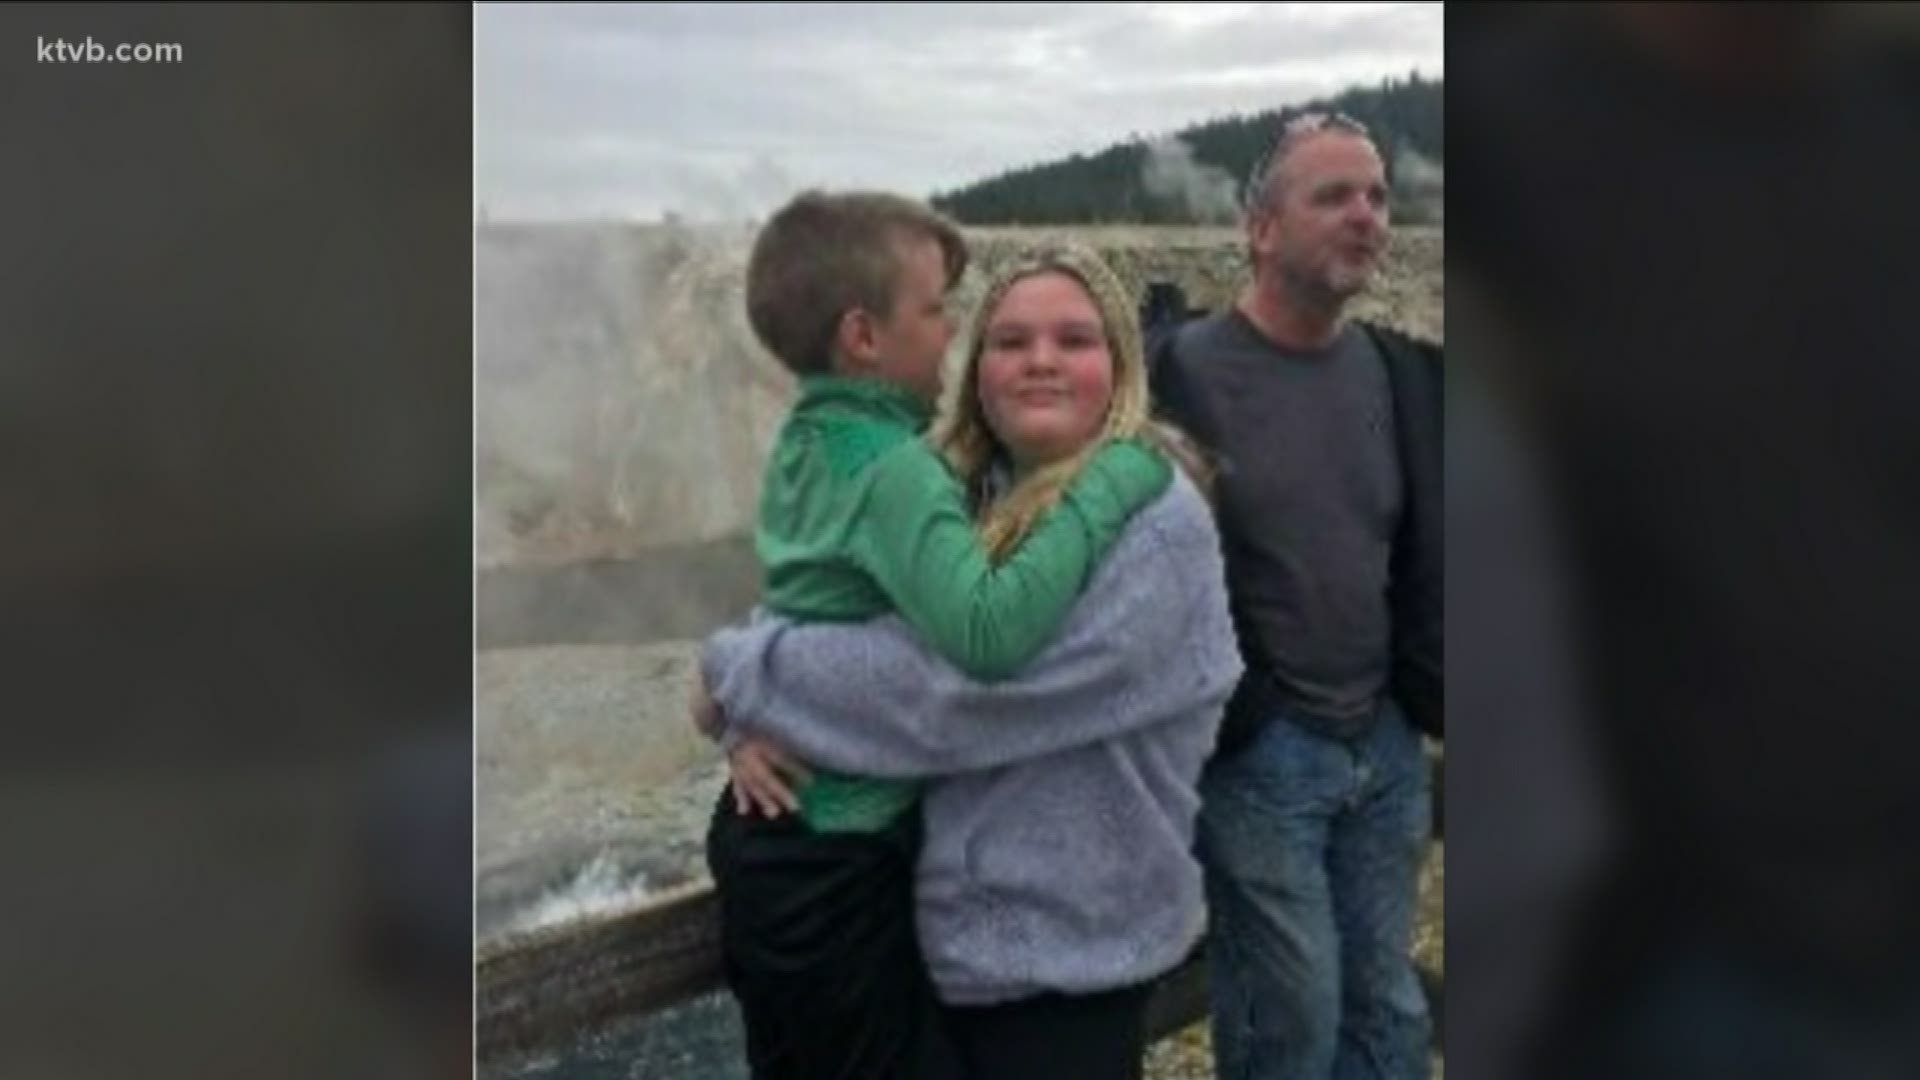 Lori Vallow's children, 7-year-old Joshua "JJ" Vallow and 17-year-old Tylee Ryan were last seen in Yellowstone National Park on Sept. 8, 2019.